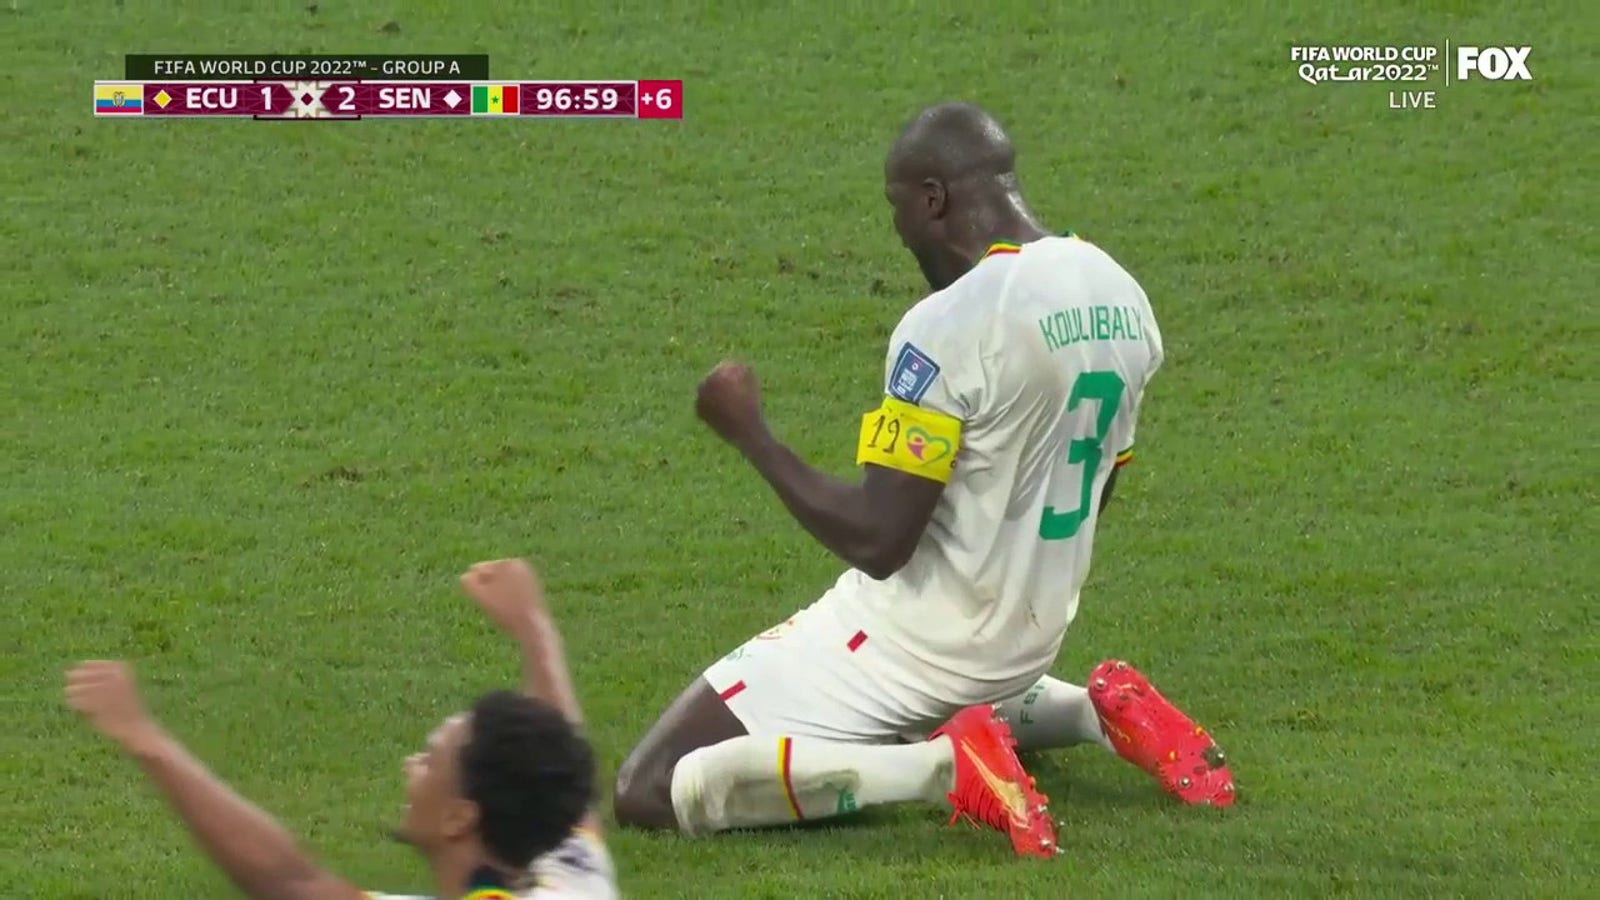 Senegal entered the knockout round for the first time since 2002